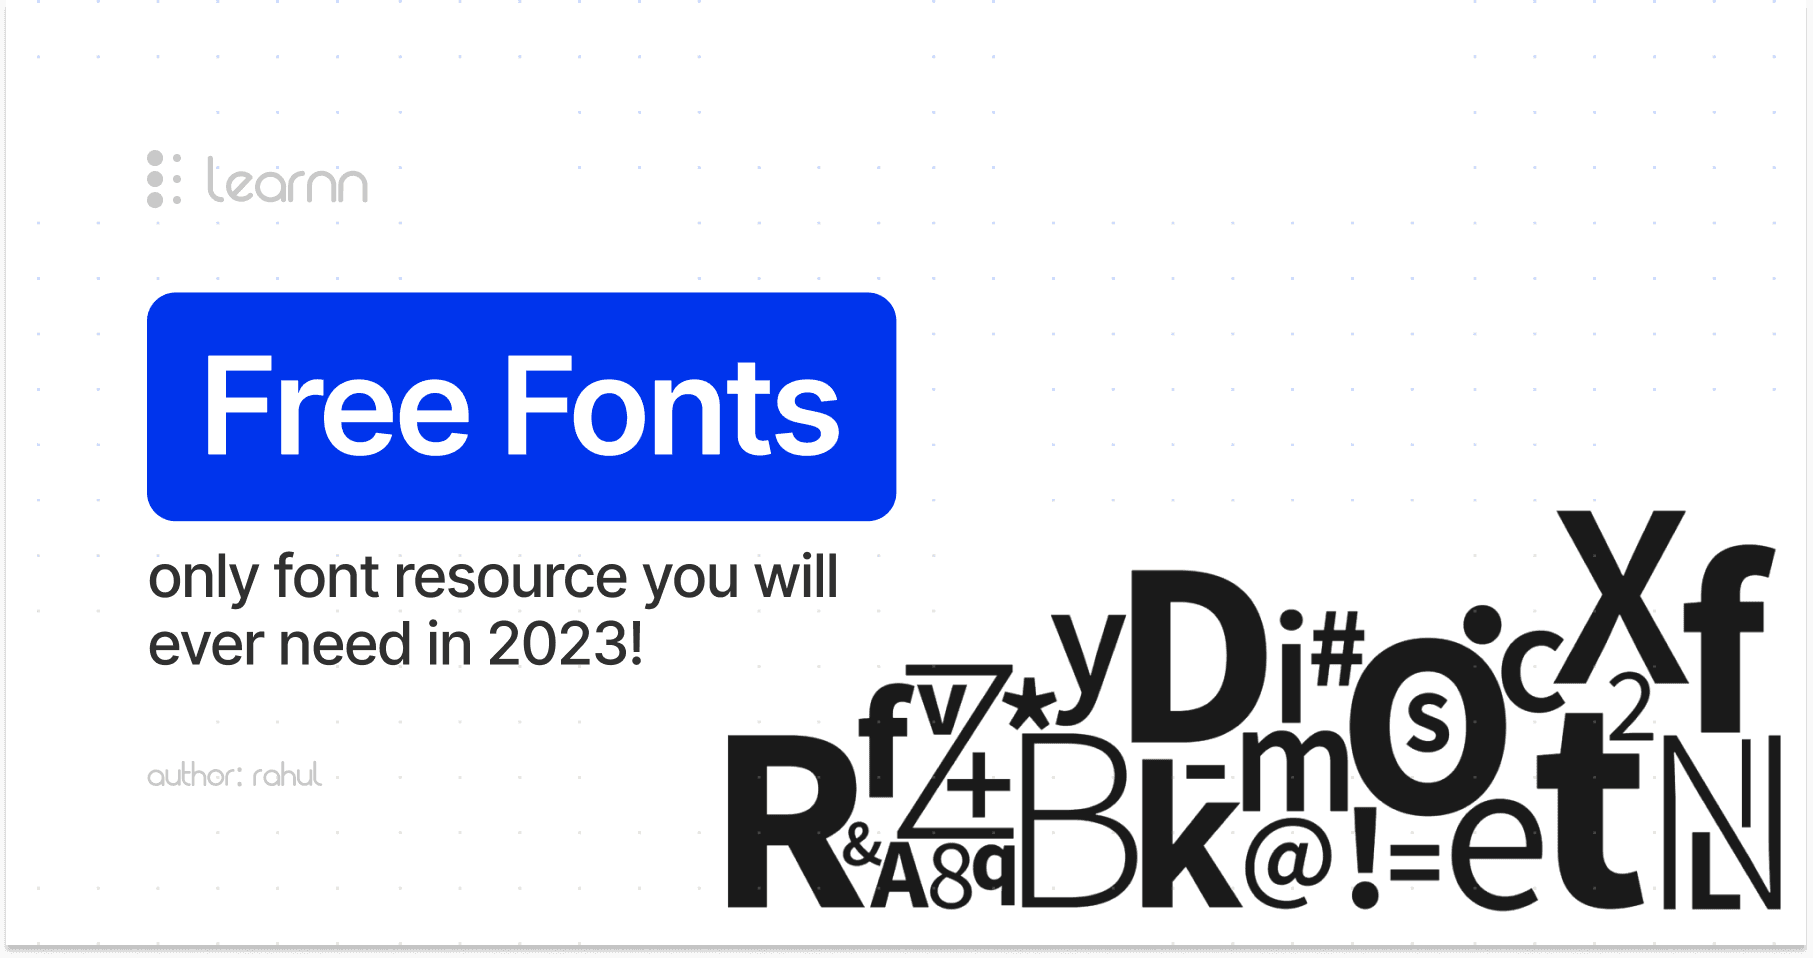 200+ Free Fonts | The only font resource you will ever need in 2023